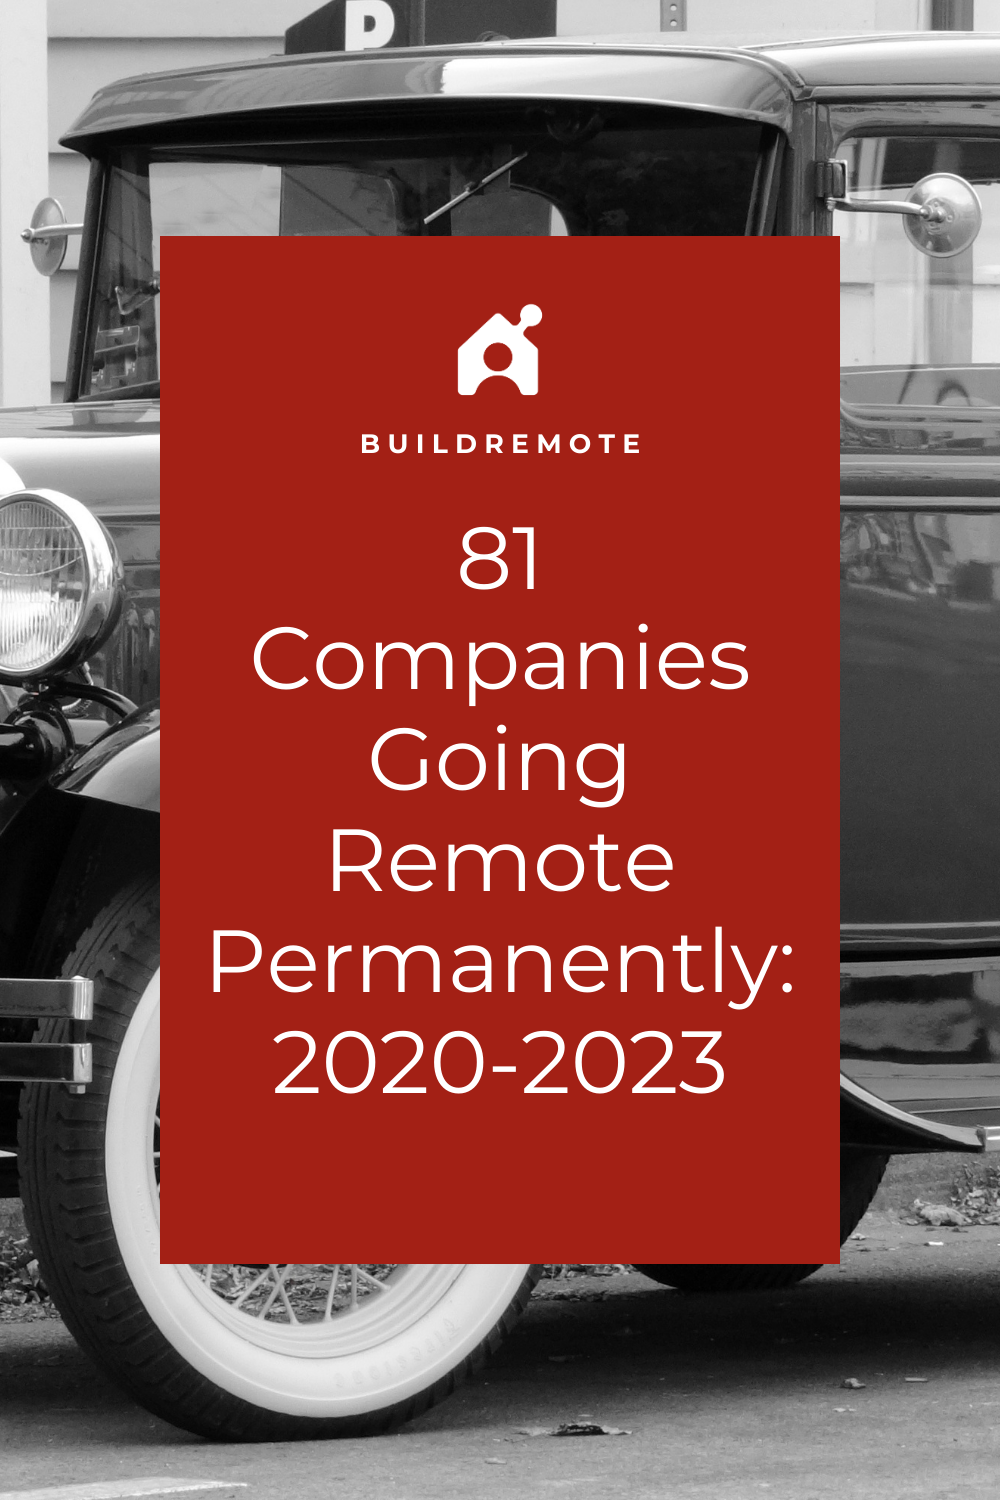 Pinterest Image - 81 Companies Going Remote Permanently: 2020-2023